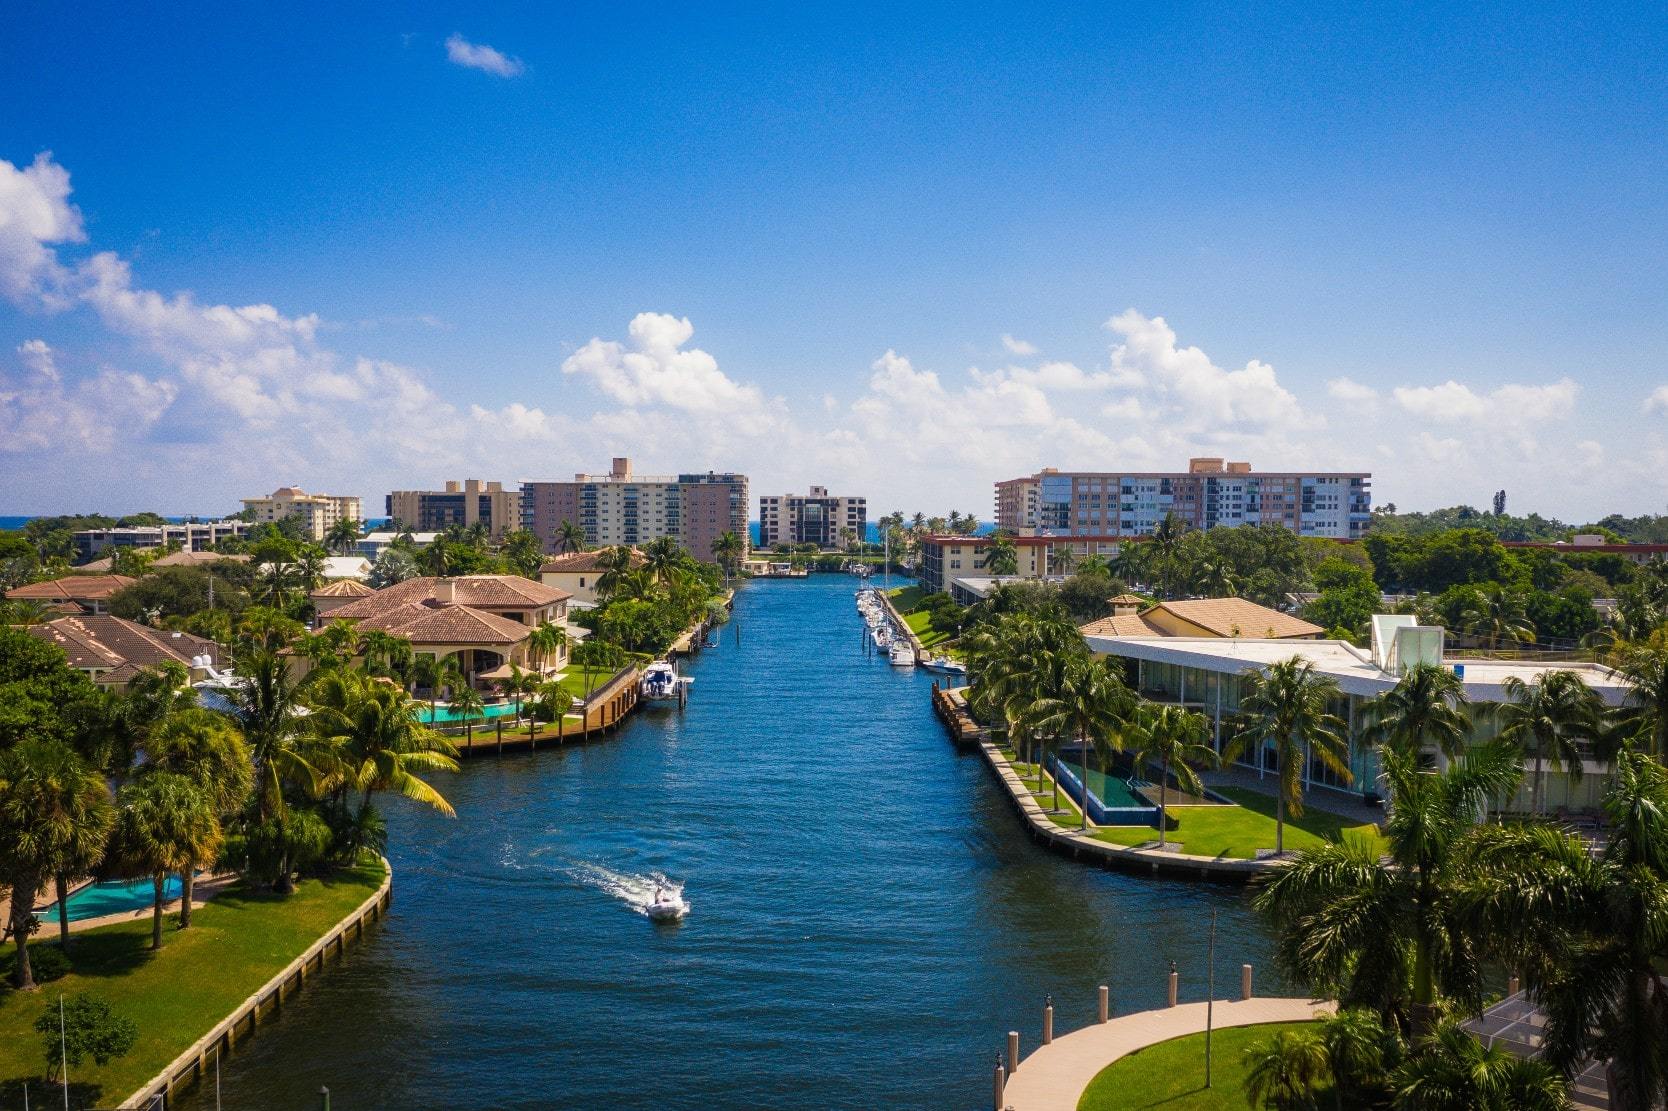 Aerial view of a canal lined with waterfront real estate in Lighthouse Point, Florida